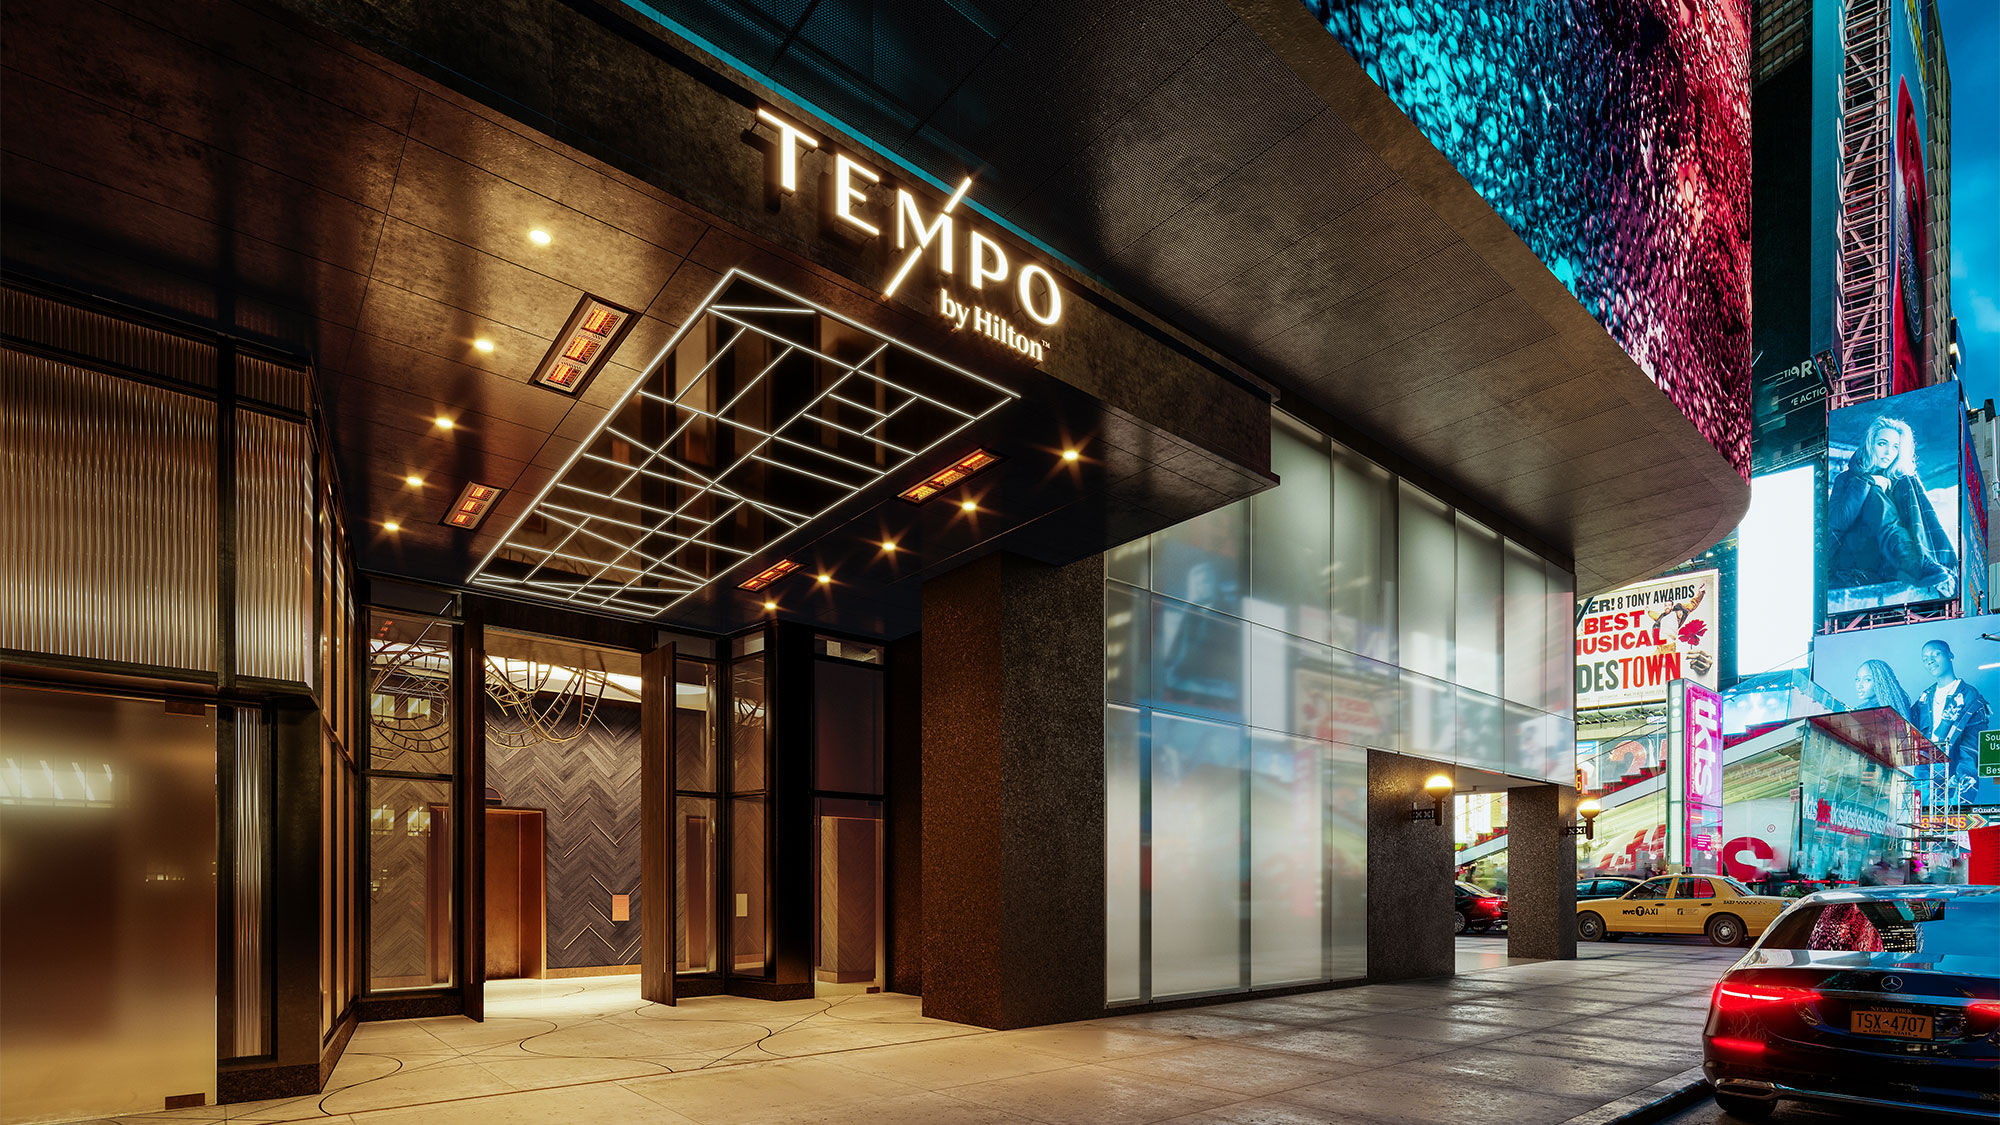 Hilton's first Tempo hotel to open in New York next year: Travel Weekly